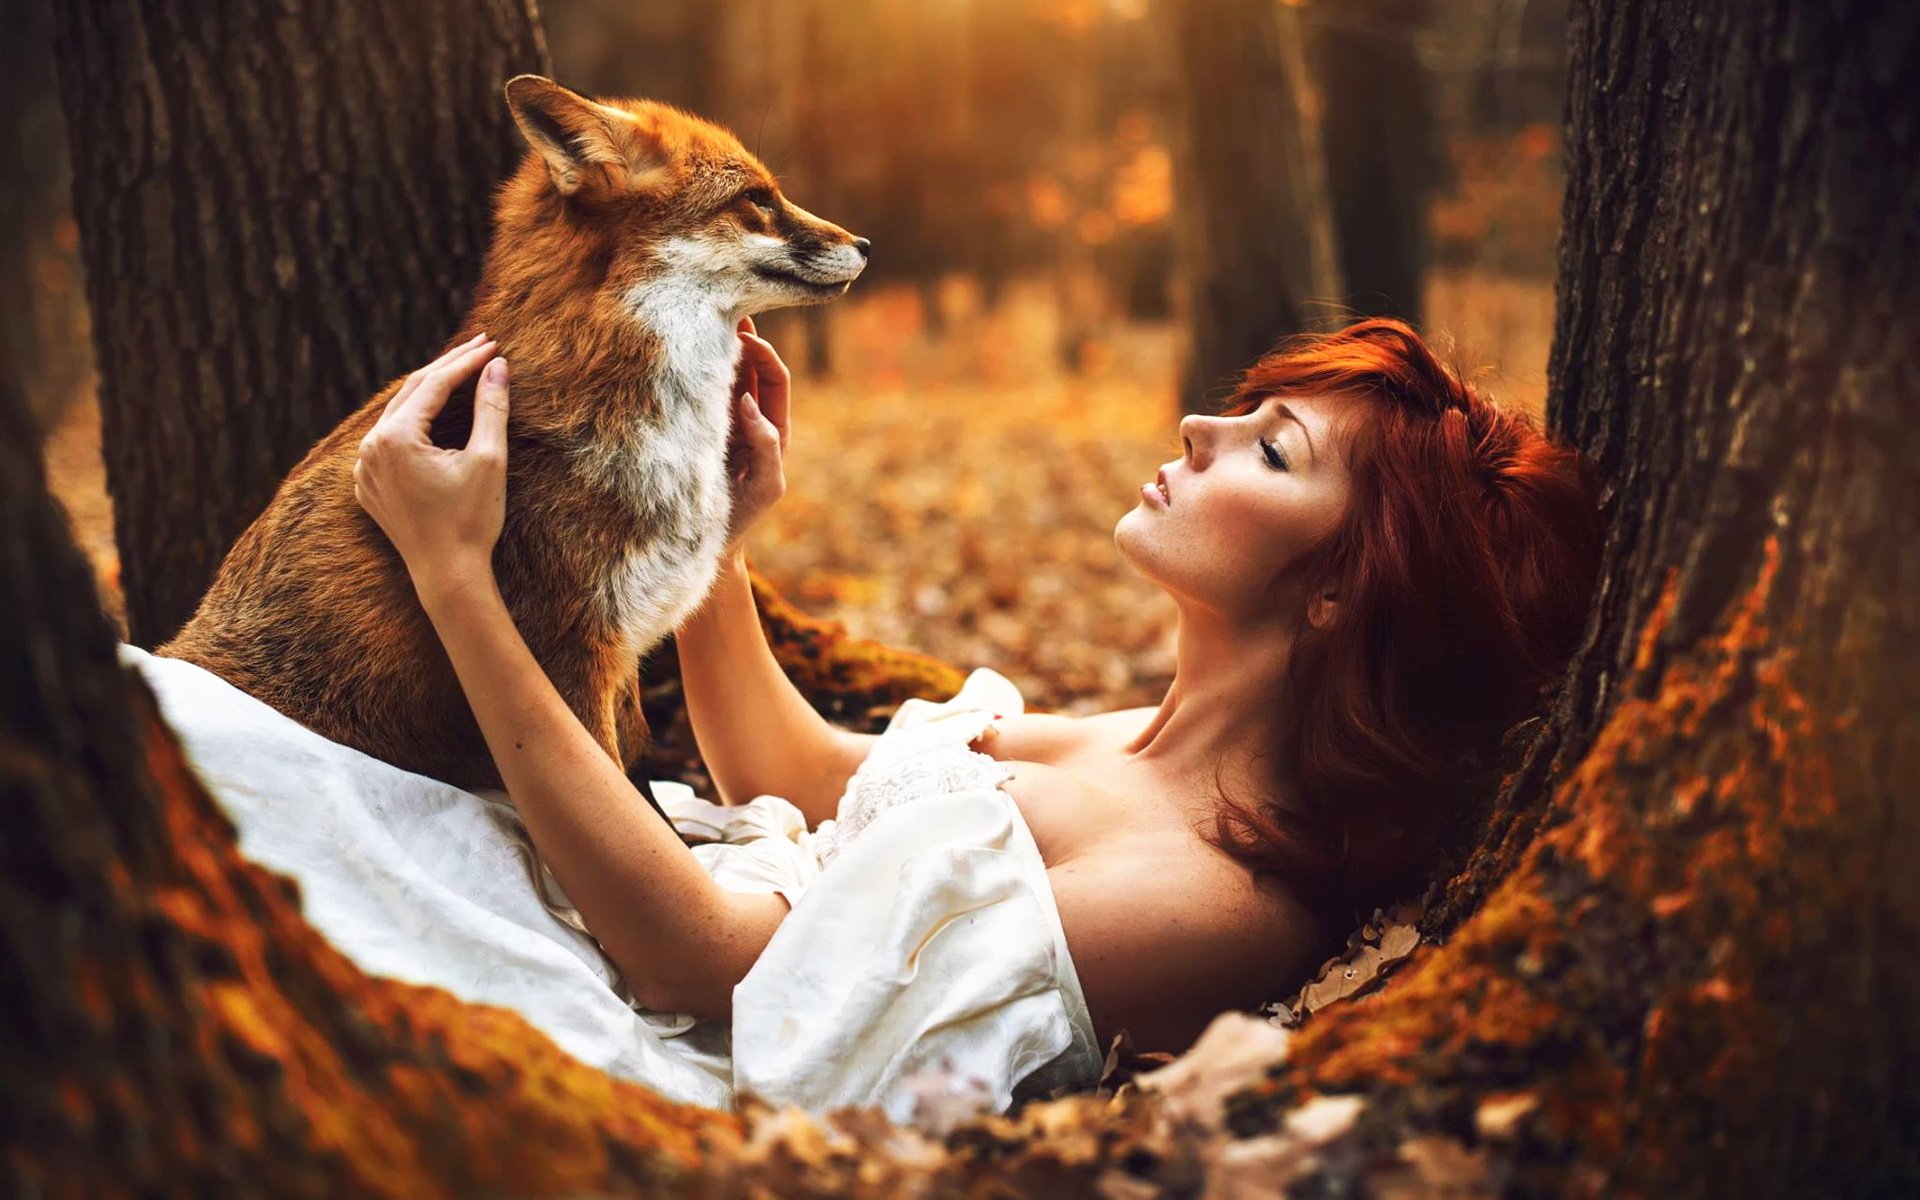 Red Fox and Woman